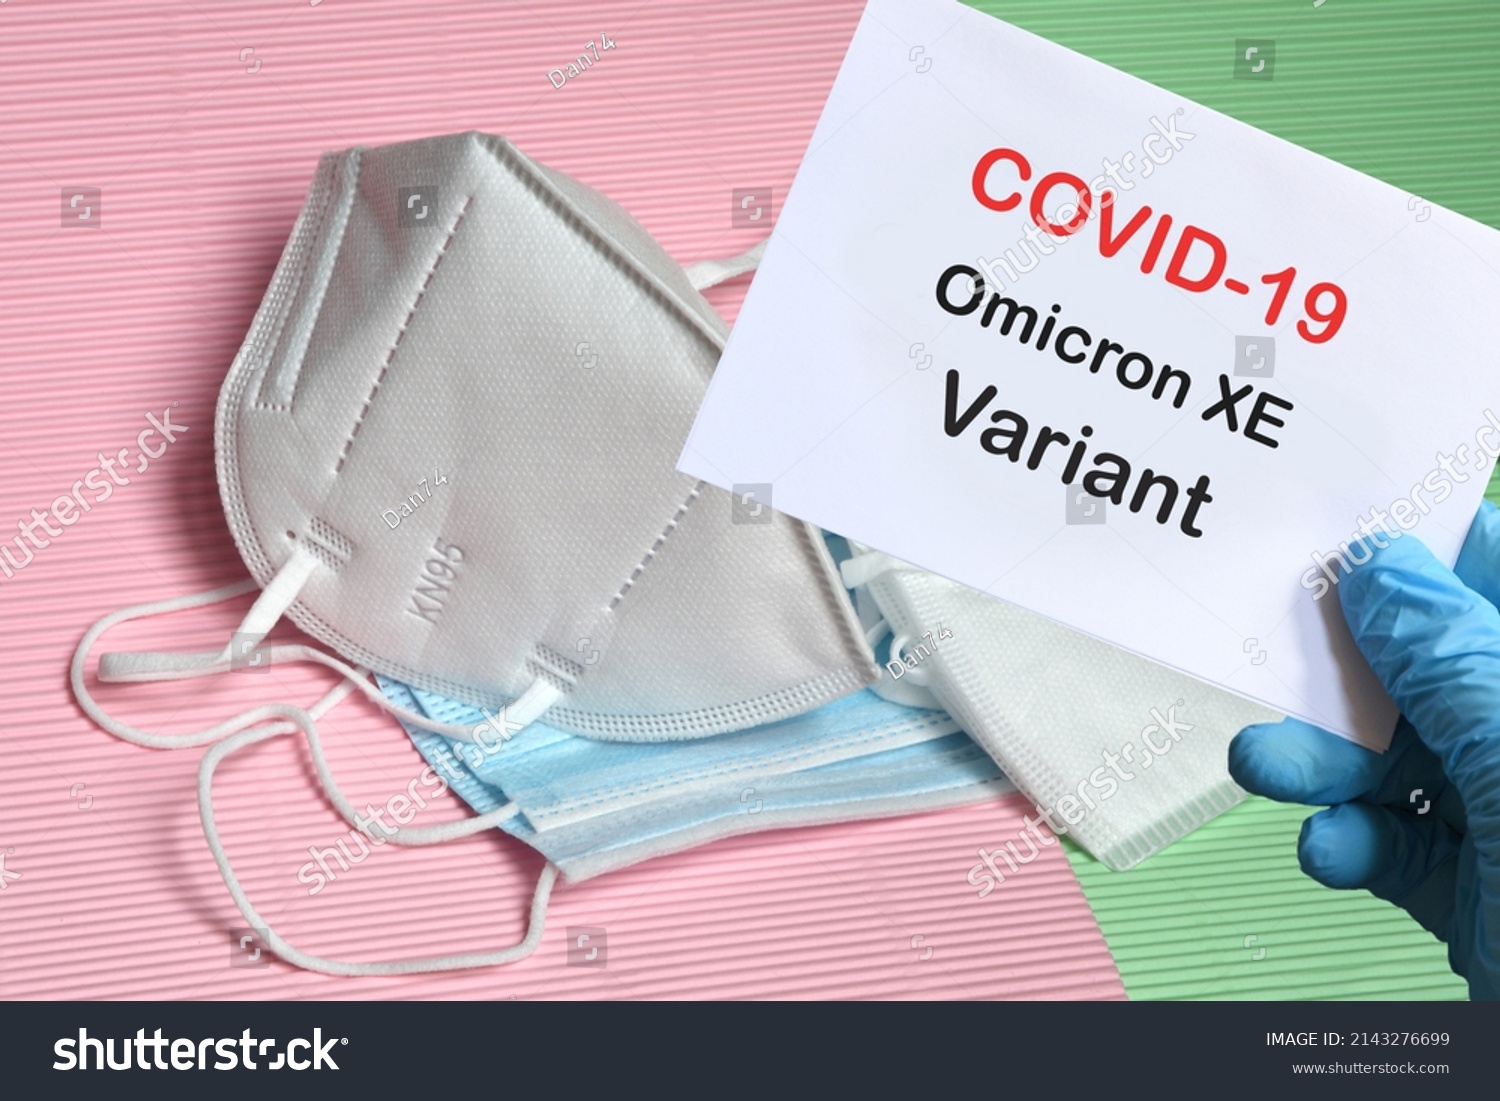 Doctor's hand in blue glove with white paper and text Covid-19 Omicron XE Variant with various protection masks on background. COVID-19 Omicron XE Variant strain protection concept. #2143276699